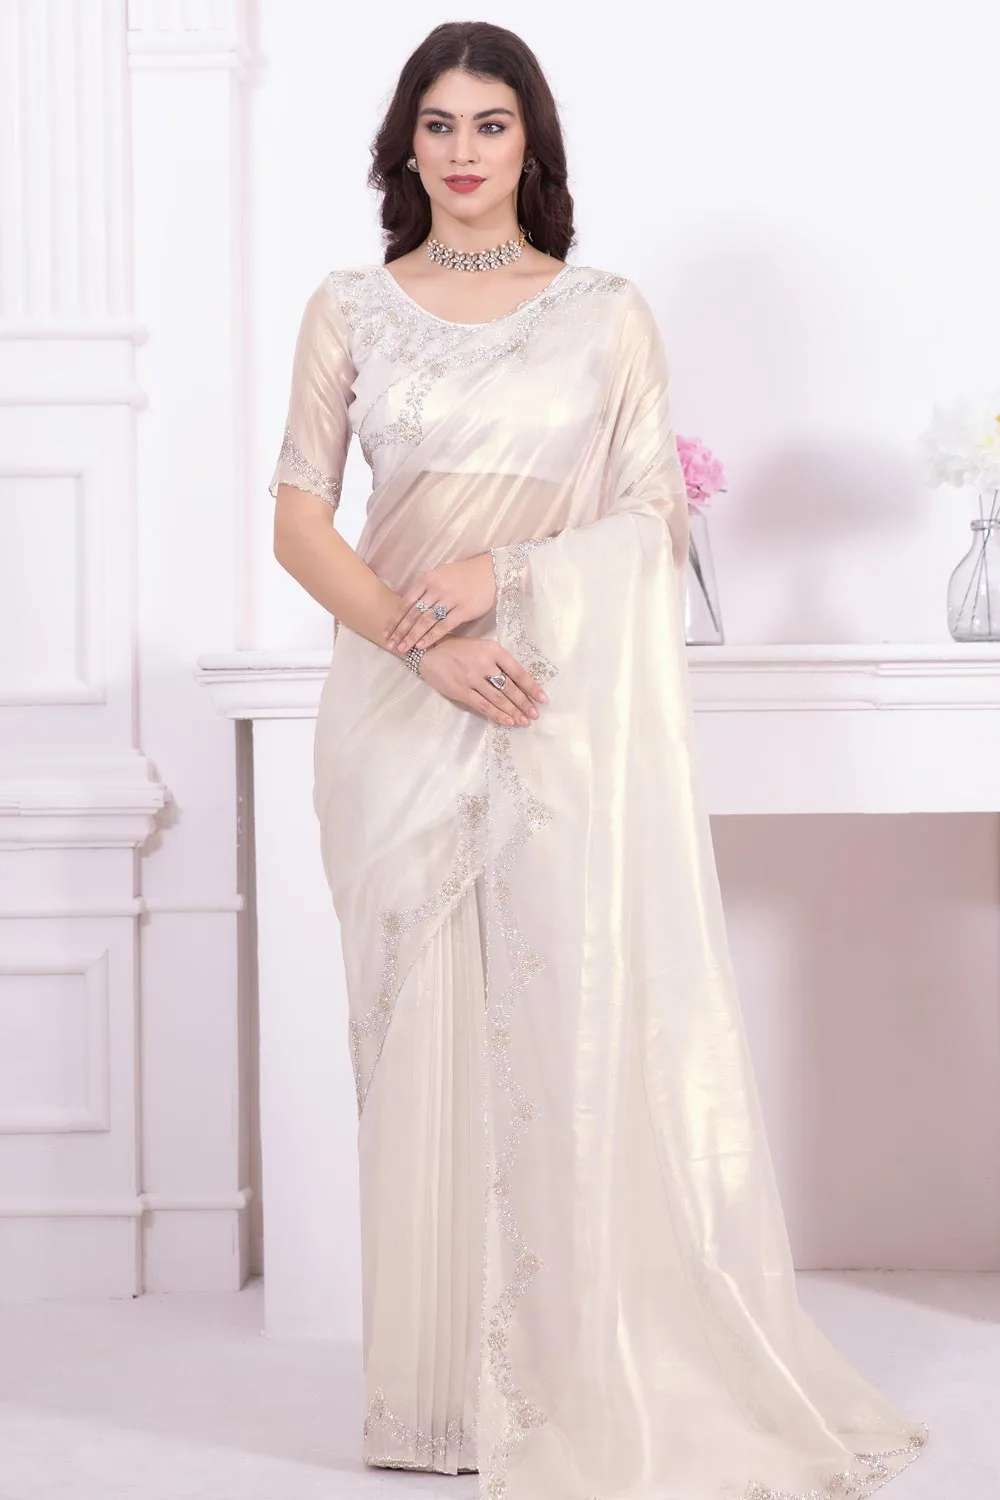 Fancy Off White Saree with Raina Net Coating Fabric and Dual-Colored Zircon Border